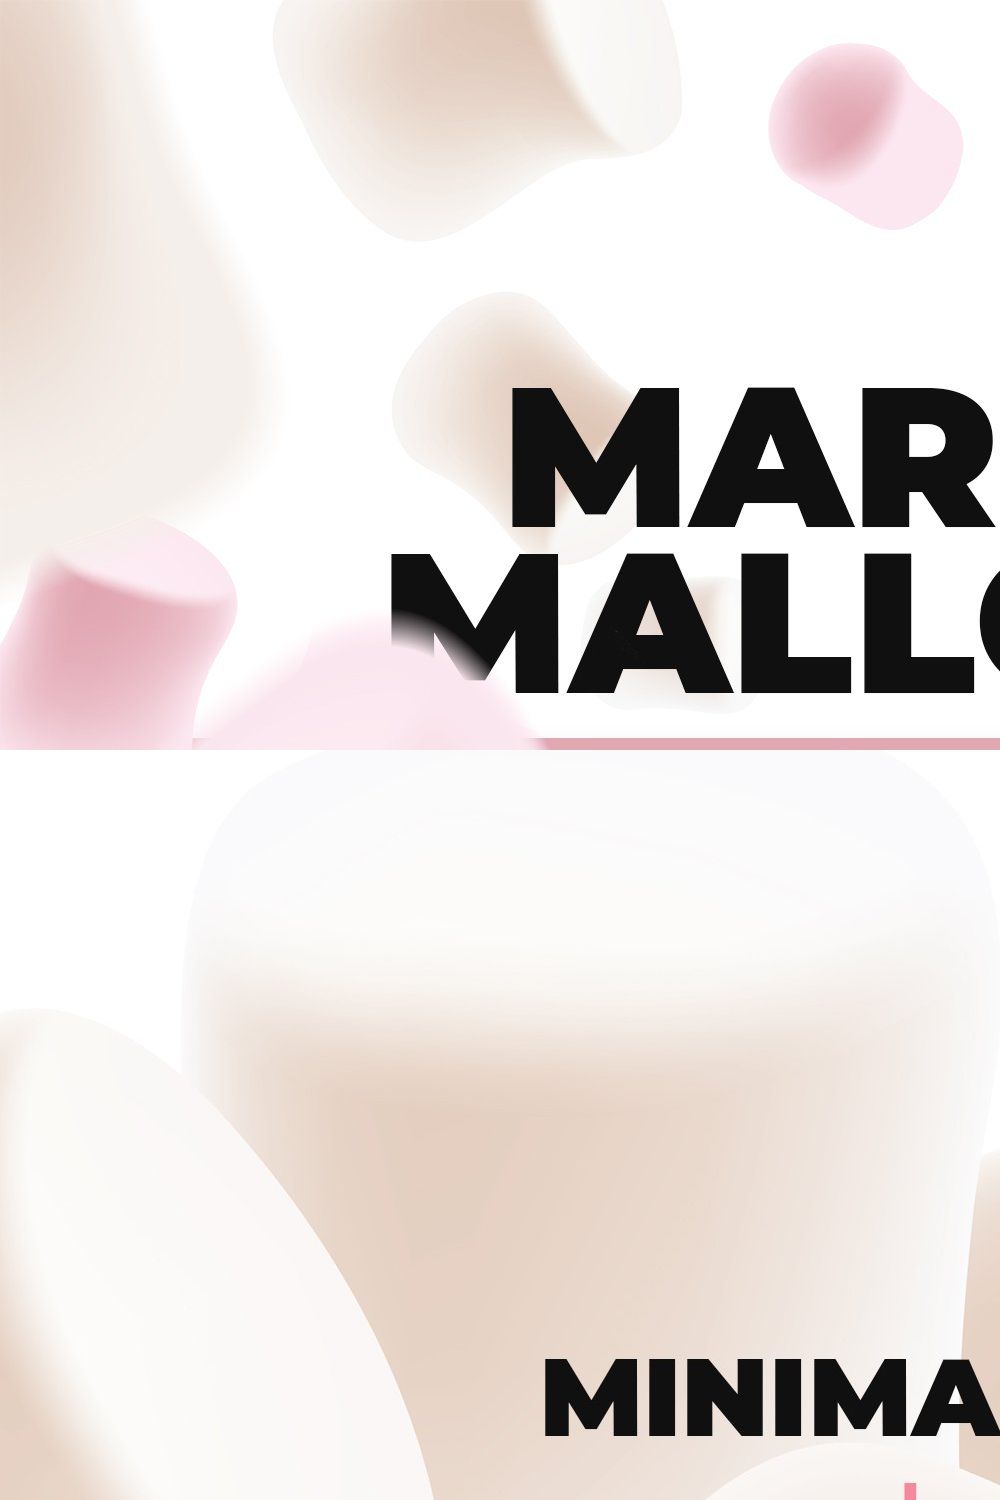 Realistic Marshmallow set pinterest preview image.